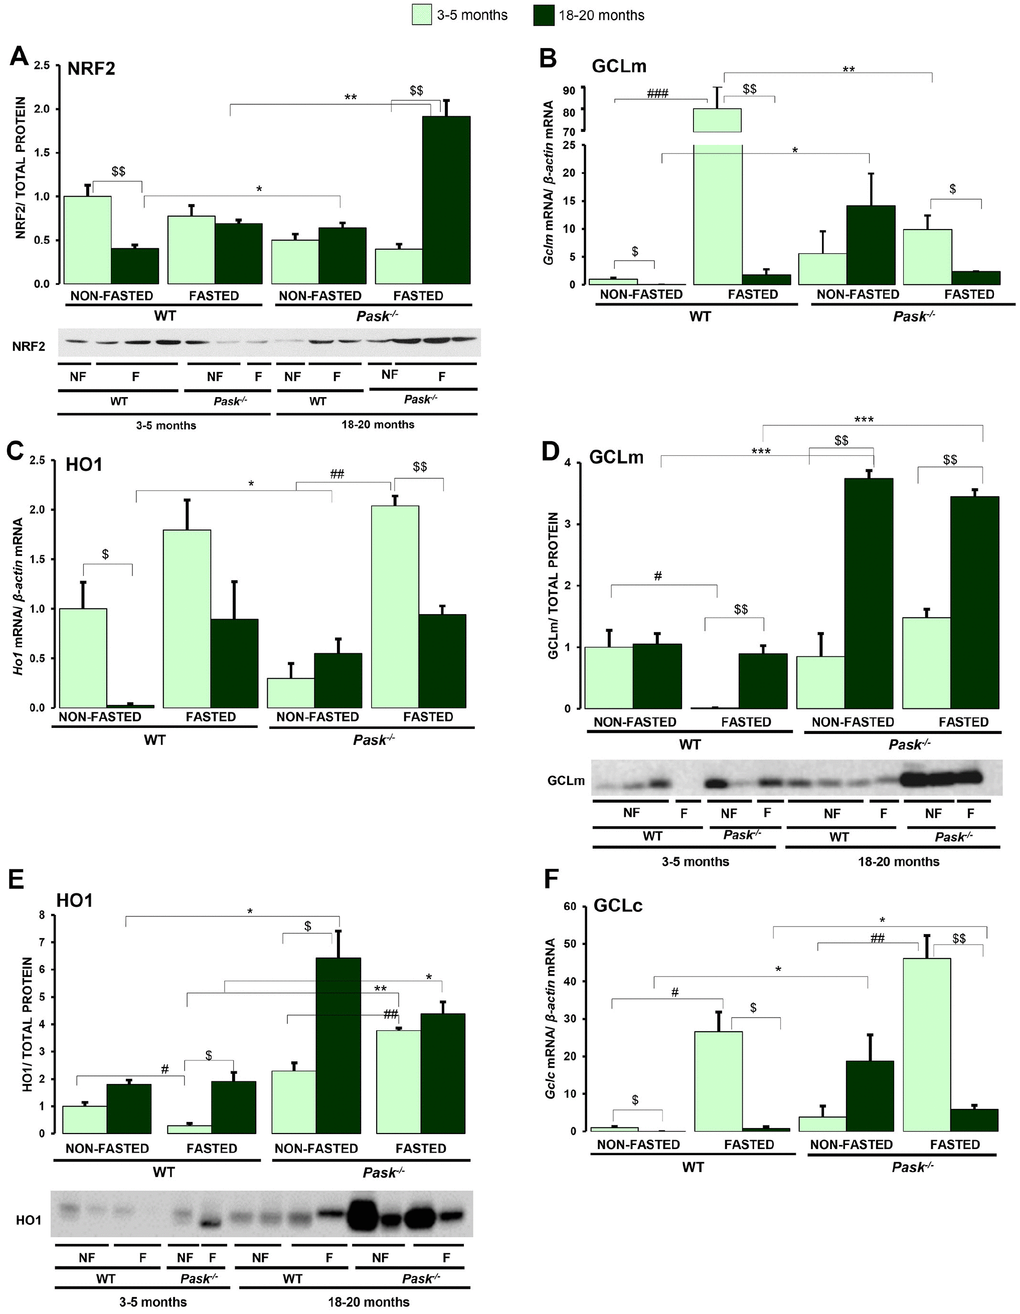 Effects of aging and PASK deficiency on NRF2, GCLm and HO1 protein expression. Immunoblot analysis of NRF2 (A), GCLm (D) and HO1 (E) in livers from young (3-5 months) and aged (18-20 months) wild-type (WT) and PASK-deficient (Pask-/-) mice. Liver lysates from non-fasted (NF) and 24-h fasted (F) mice were processed for western blot analysis. Real-time PCR was used to analyze the expression of Gclm (B), Ho1 (C) and Gclc (F) mRNAs. The value obtained in 3-5-month-old non-fasted WT mice was taken as 1. Bar graphs in (A, D, E) represent the means ± SEM of the densitometric values normalized by total protein detected by Stain-Free (TOTAL PROTEIN) (Supplementary Figure 2); (B, C, F) represent the means ± SEM, and the levels of expression were normalized by the mRNA of β-actin, n = 4-5 animals per condition. $P $$P vs. 18-20 months; * P P P vs. Pask-/-; #P ##P vs. fasted.